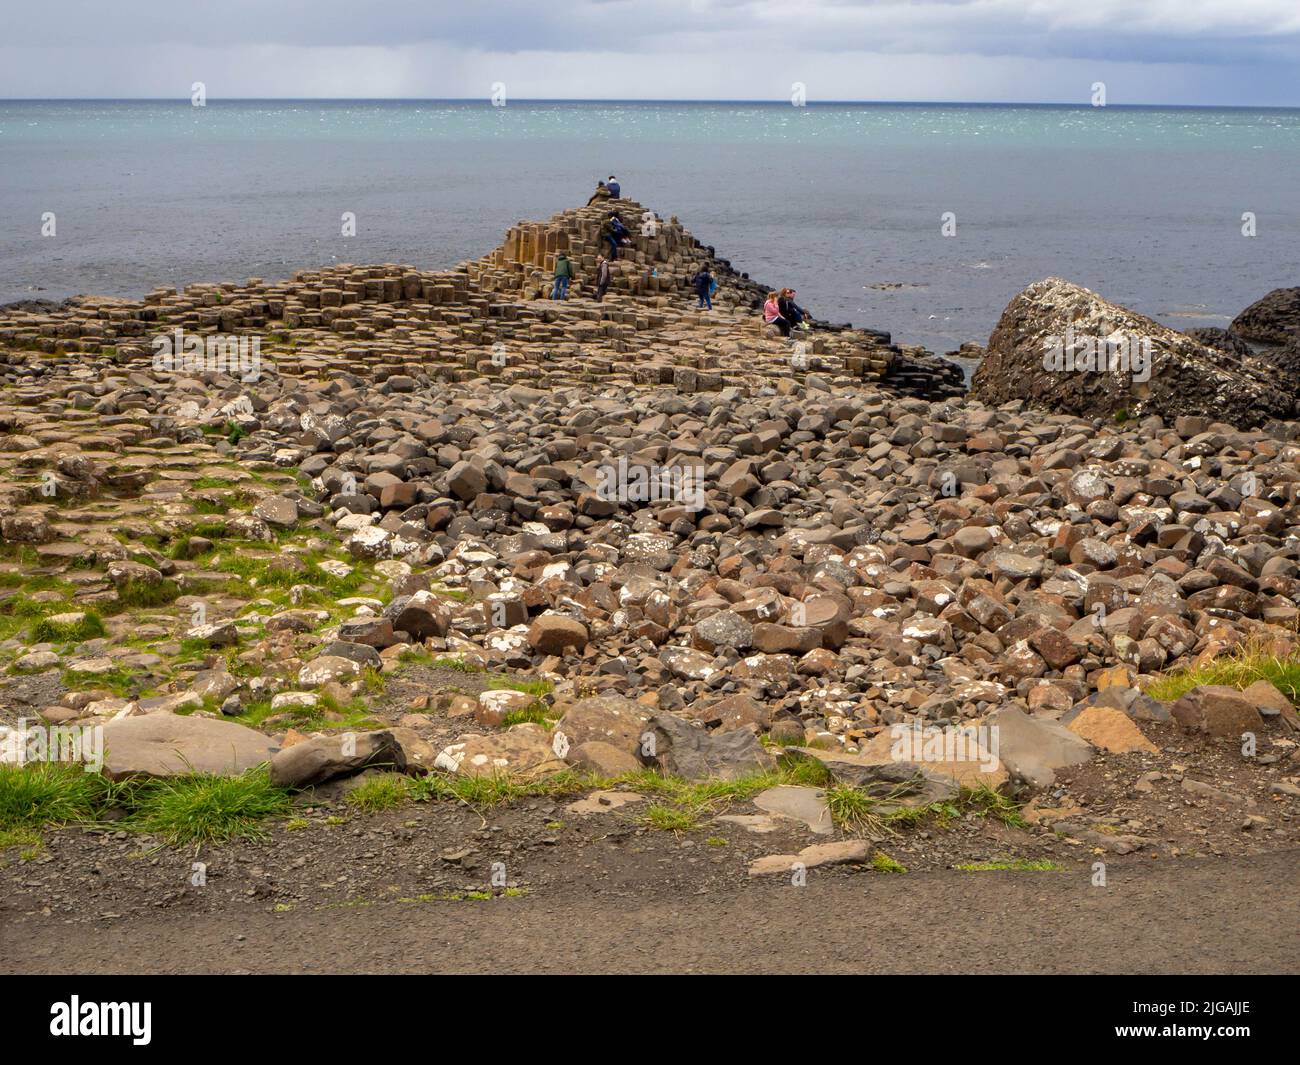 Giants Causeway rocky outcrop reaching out to the North Atlantic Ocean Stock Photo